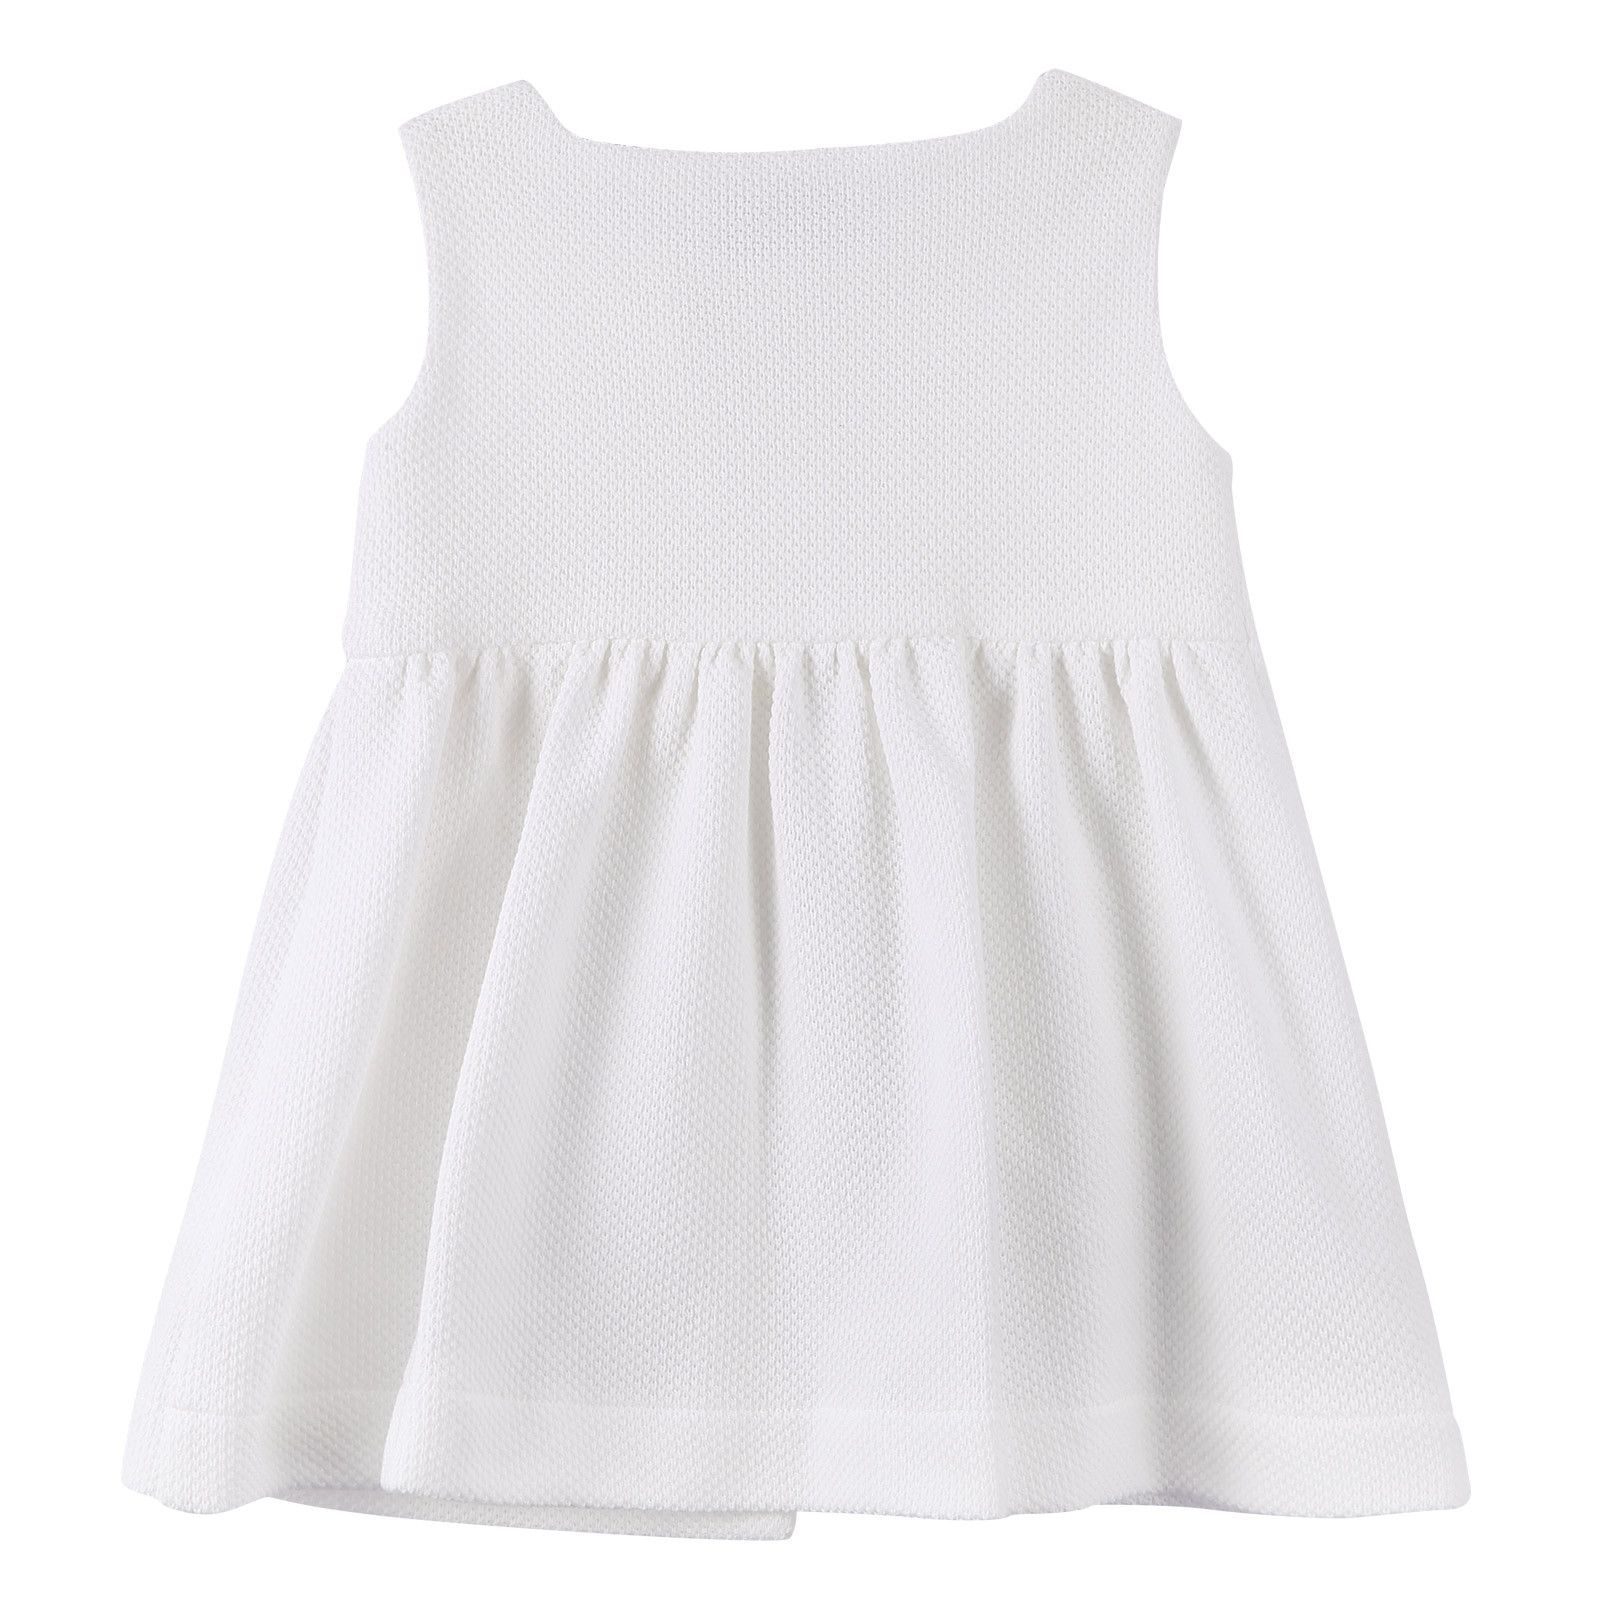 Baby Girls White Dress With Gold Button - CÉMAROSE | Children's Fashion Store - 2